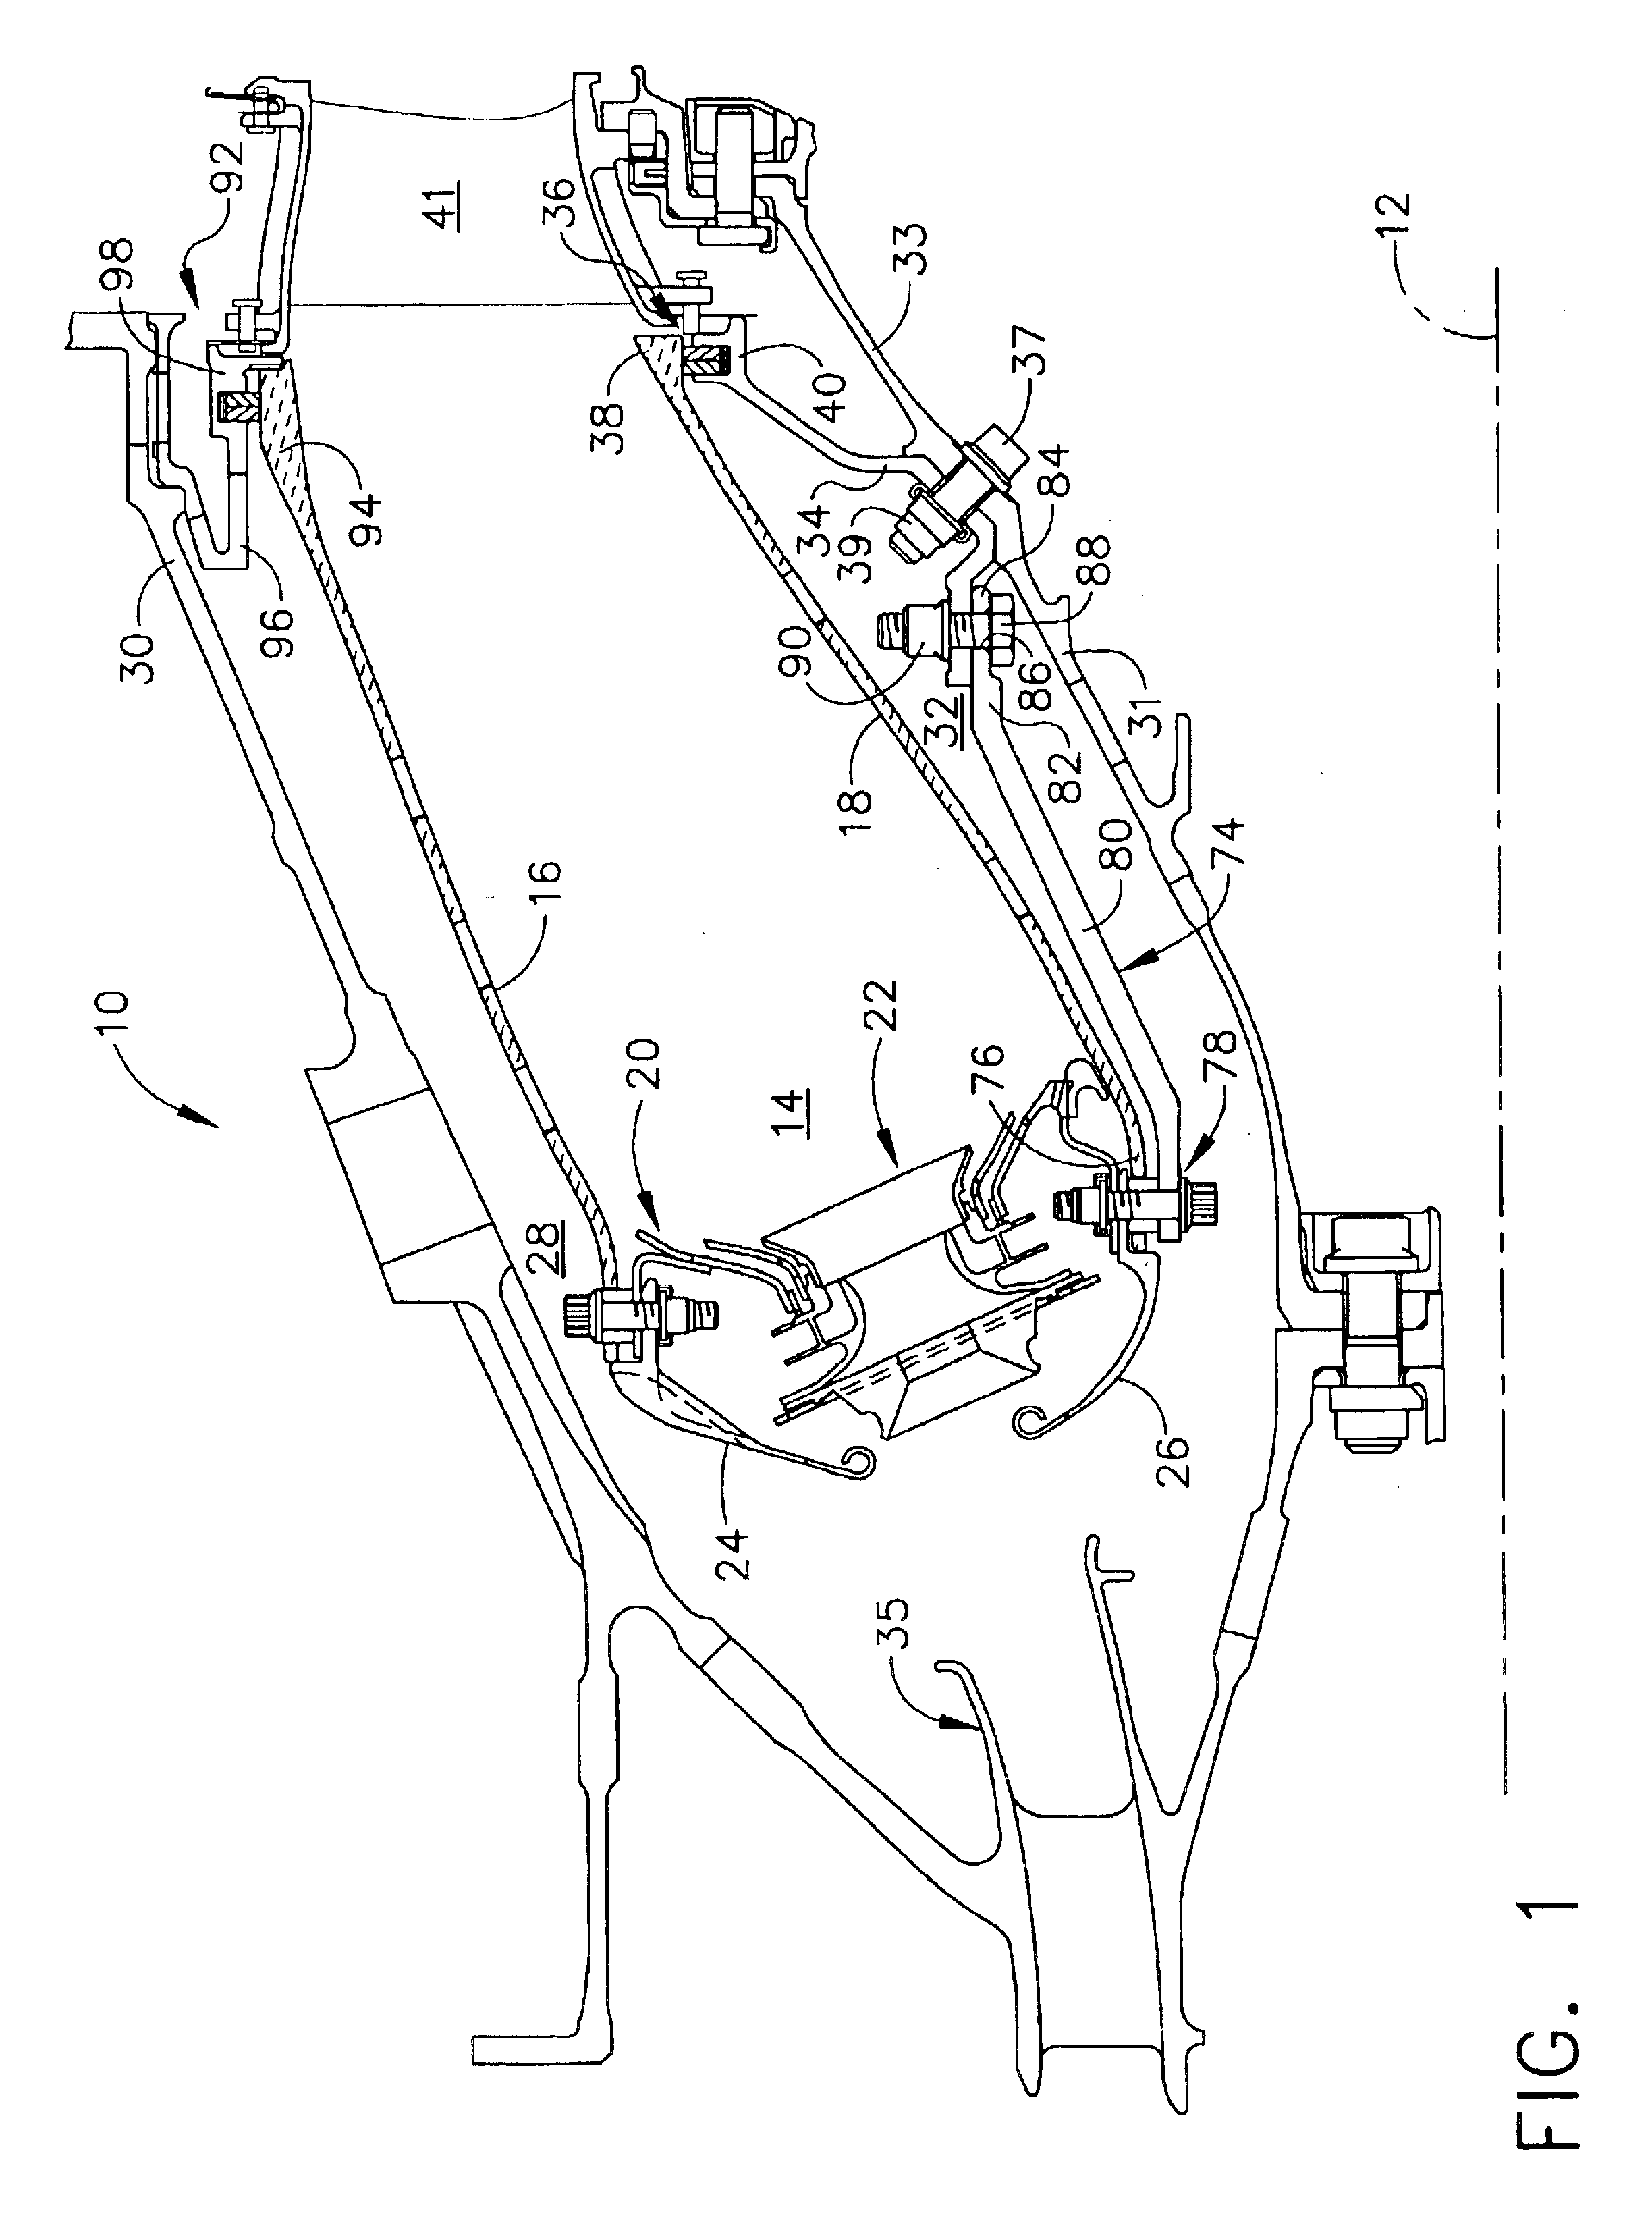 Sealing assembly for the aft end of a ceramic matrix composite liner in a gas turbine engine combustor